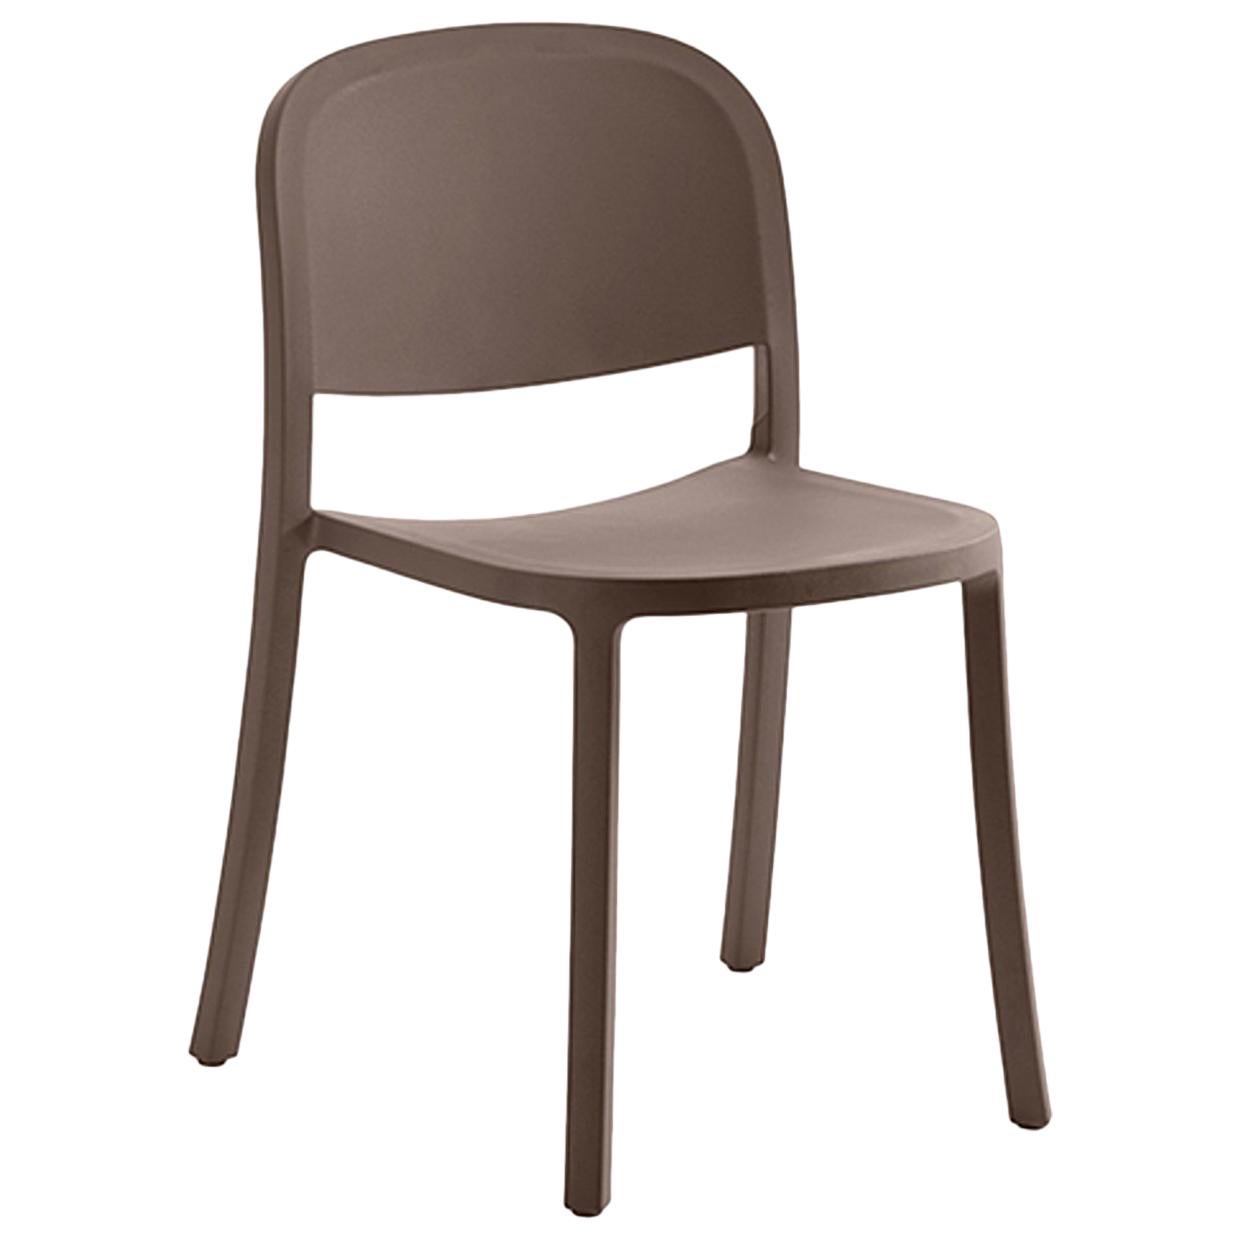 Emeco 1 Inch Reclaimed Chair in Brown by Jasper Morrison For Sale